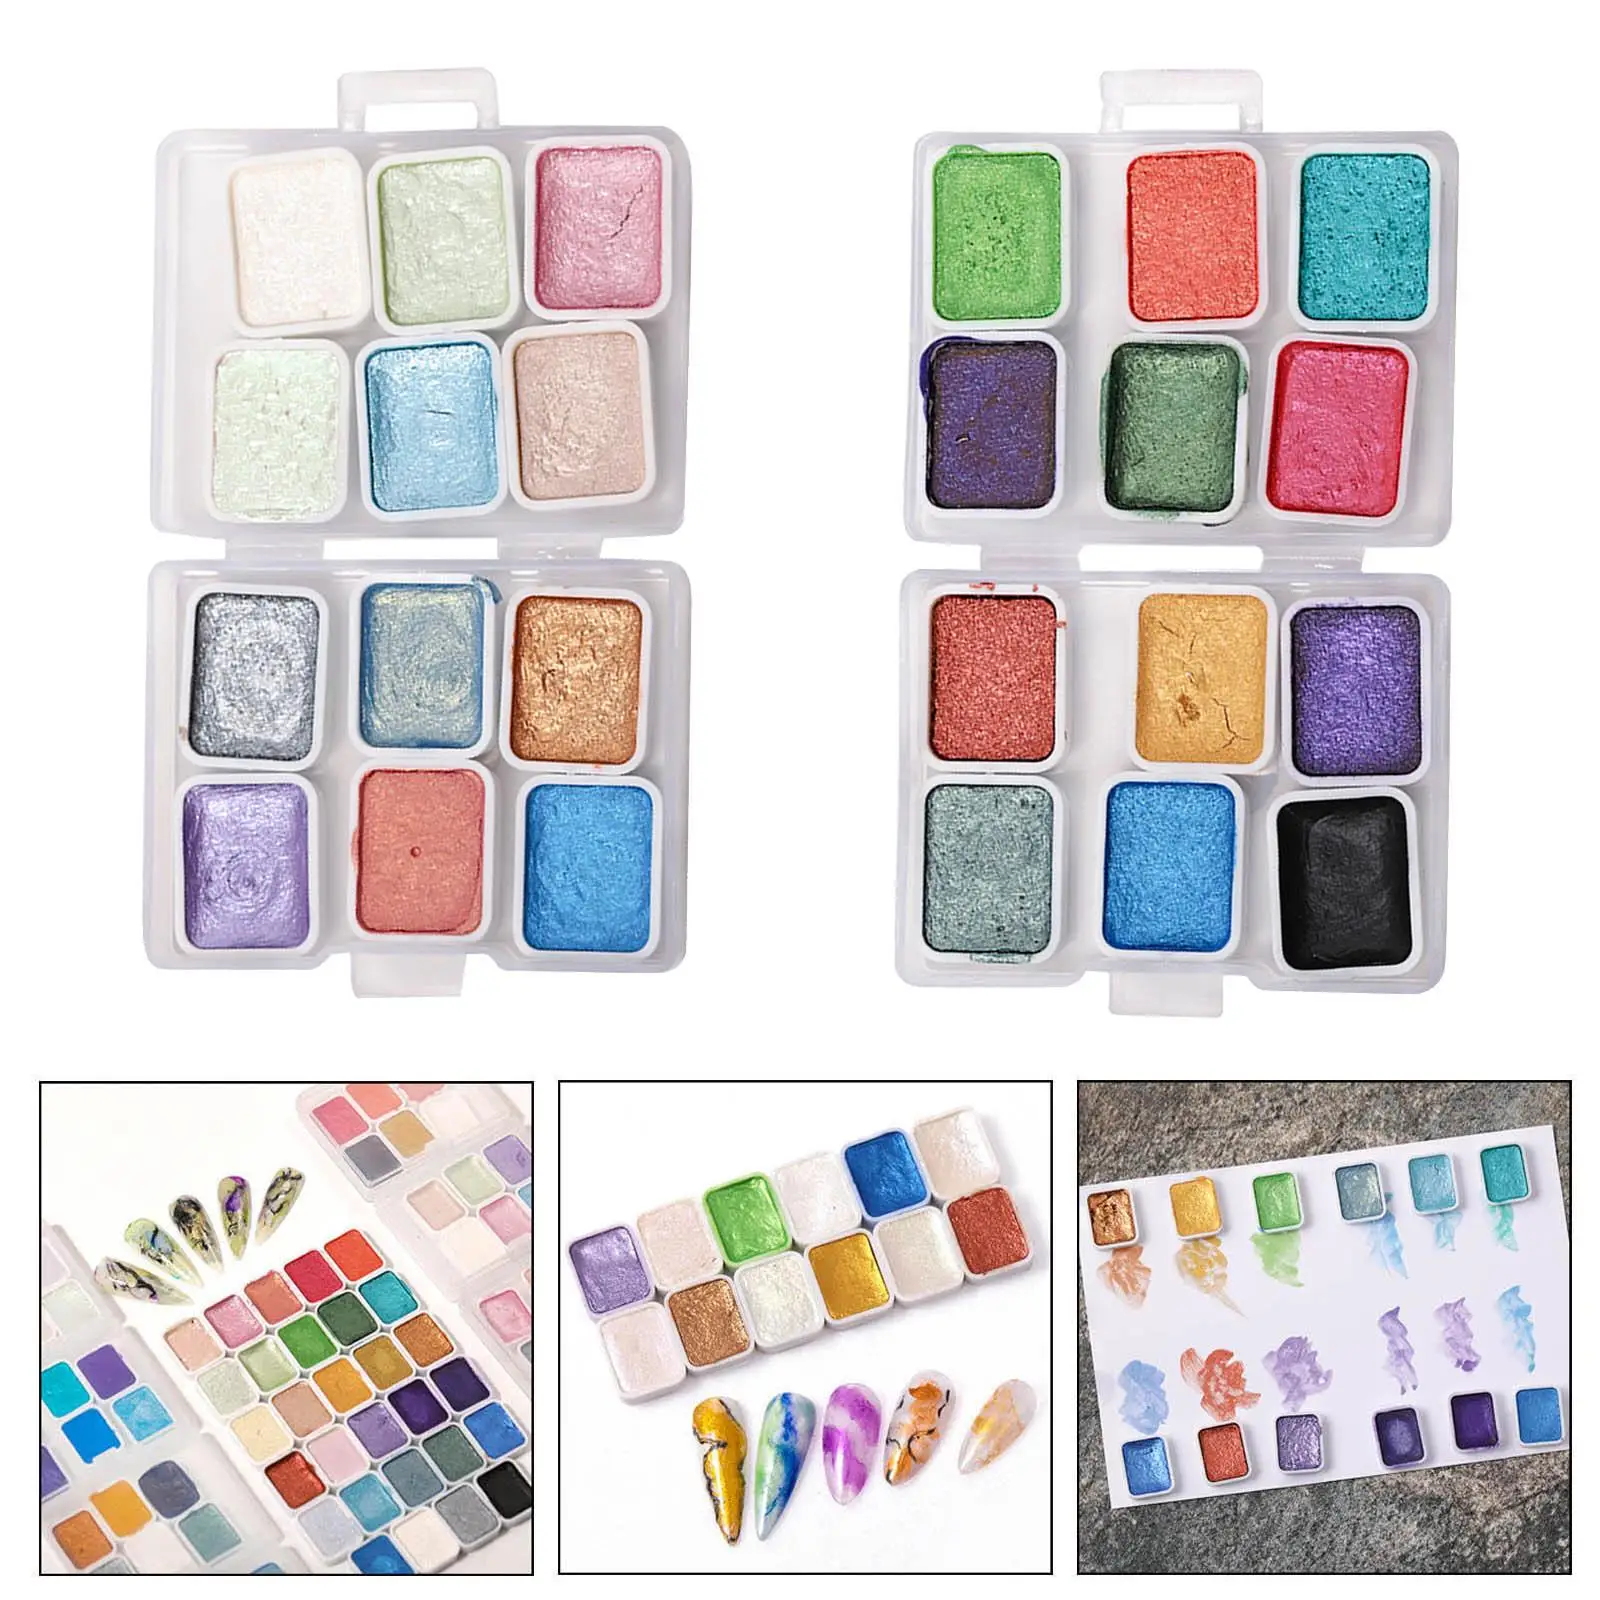 12 Colors Watercolor Paints Set Lightweight Portable Nail Art Pigments for Nail Art Decoration DIY Home School Painting Lovers